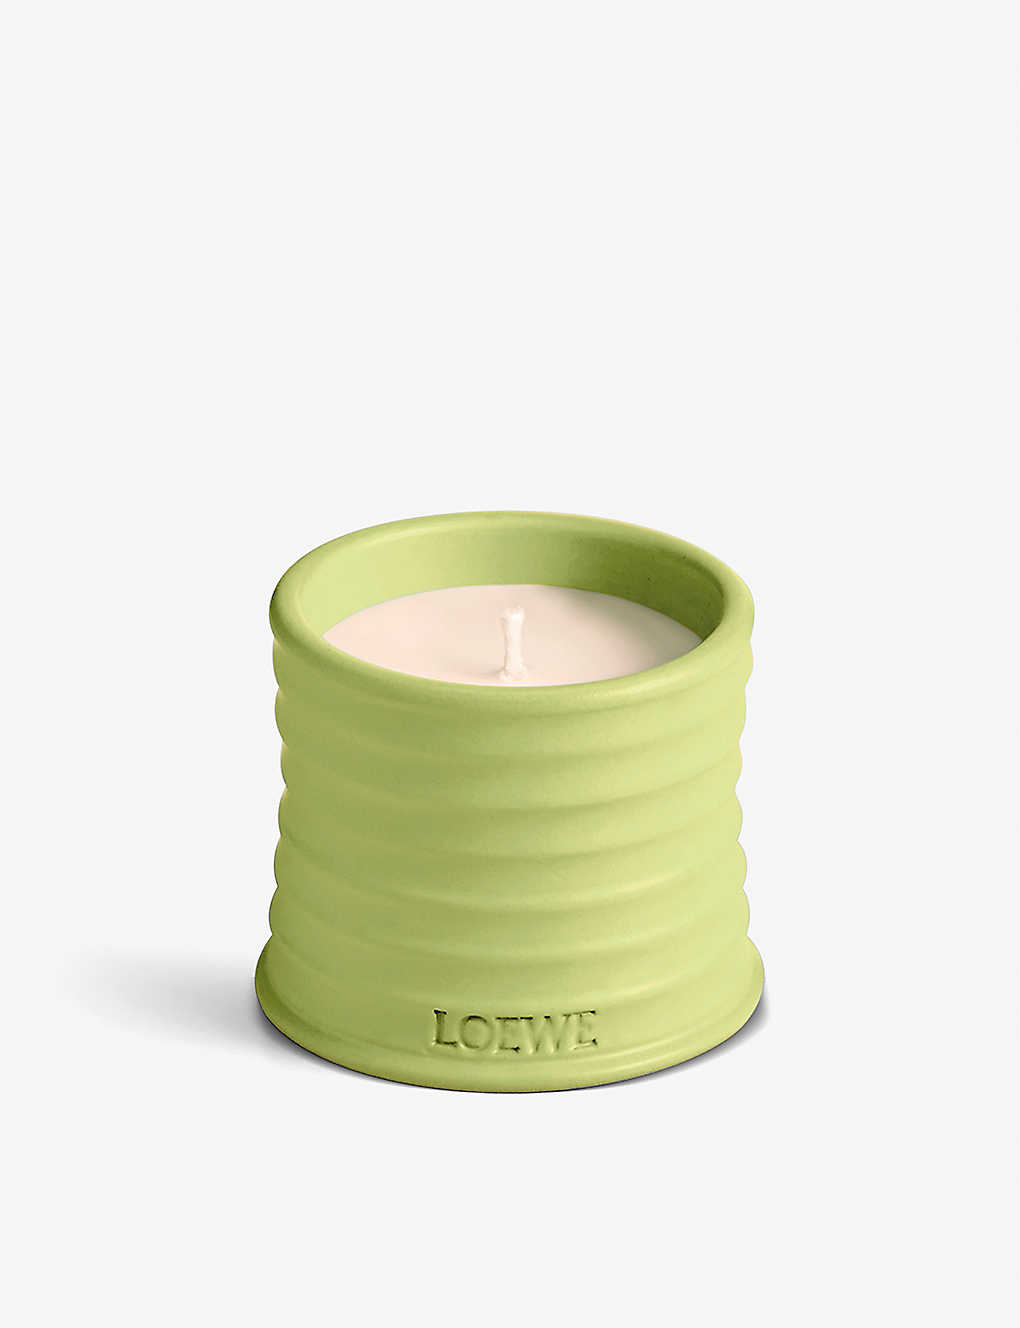 Loewe Cucumber Small Scented Candle 170g